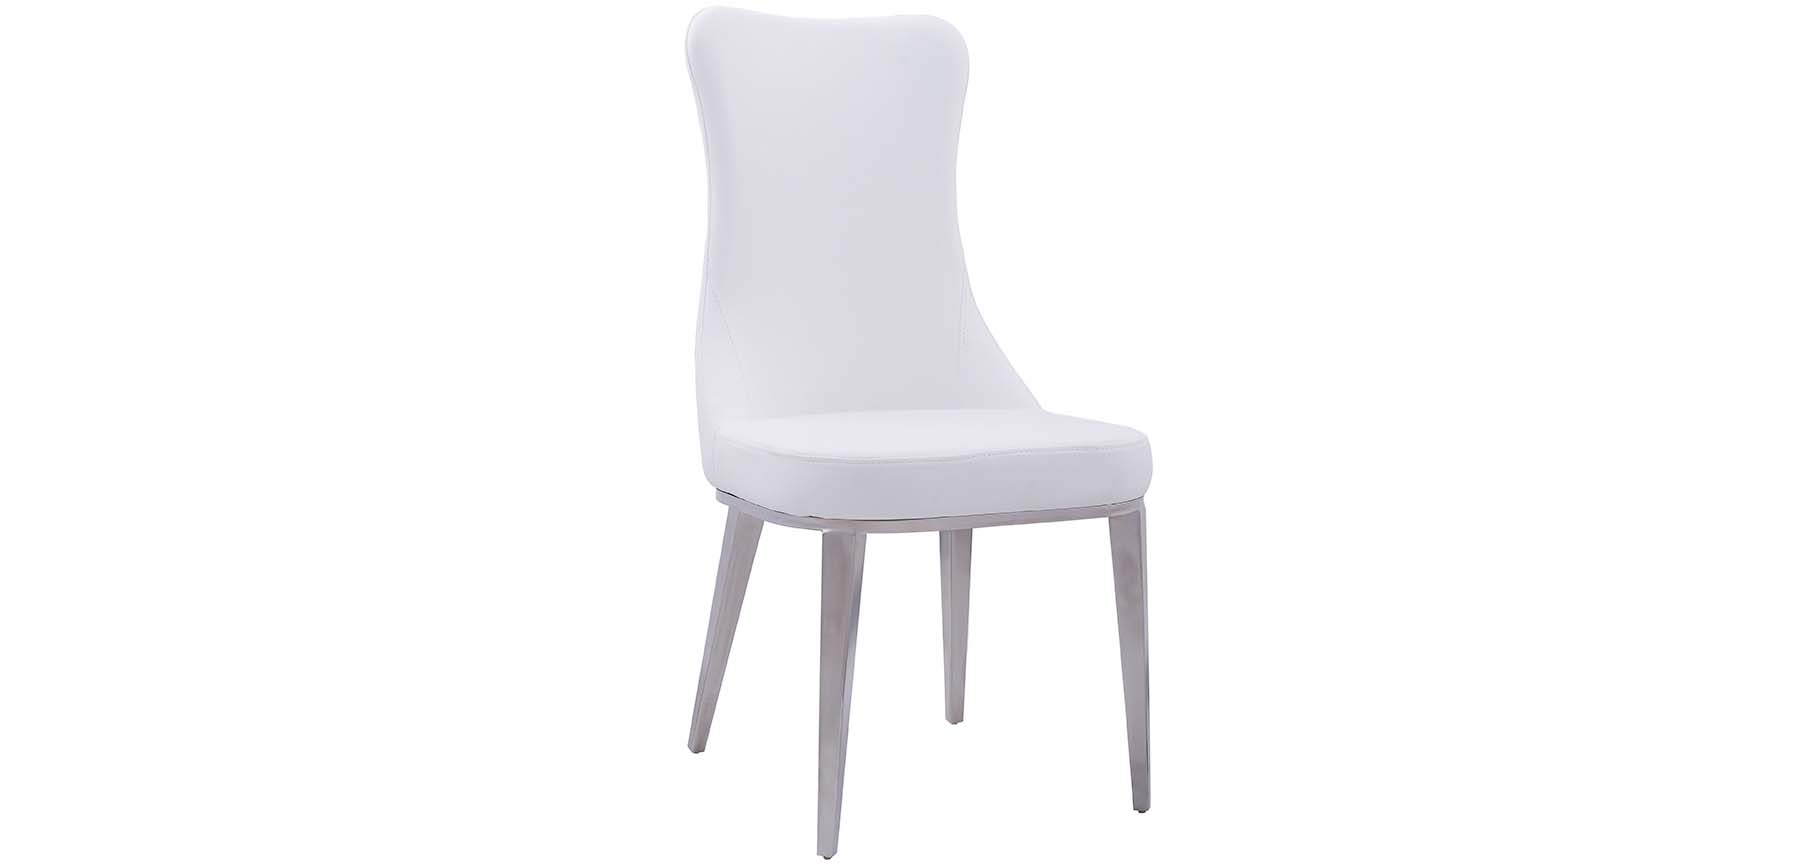 Living Room Furniture Coffee and End Tables 6138 Solid White (no pattern) Chair